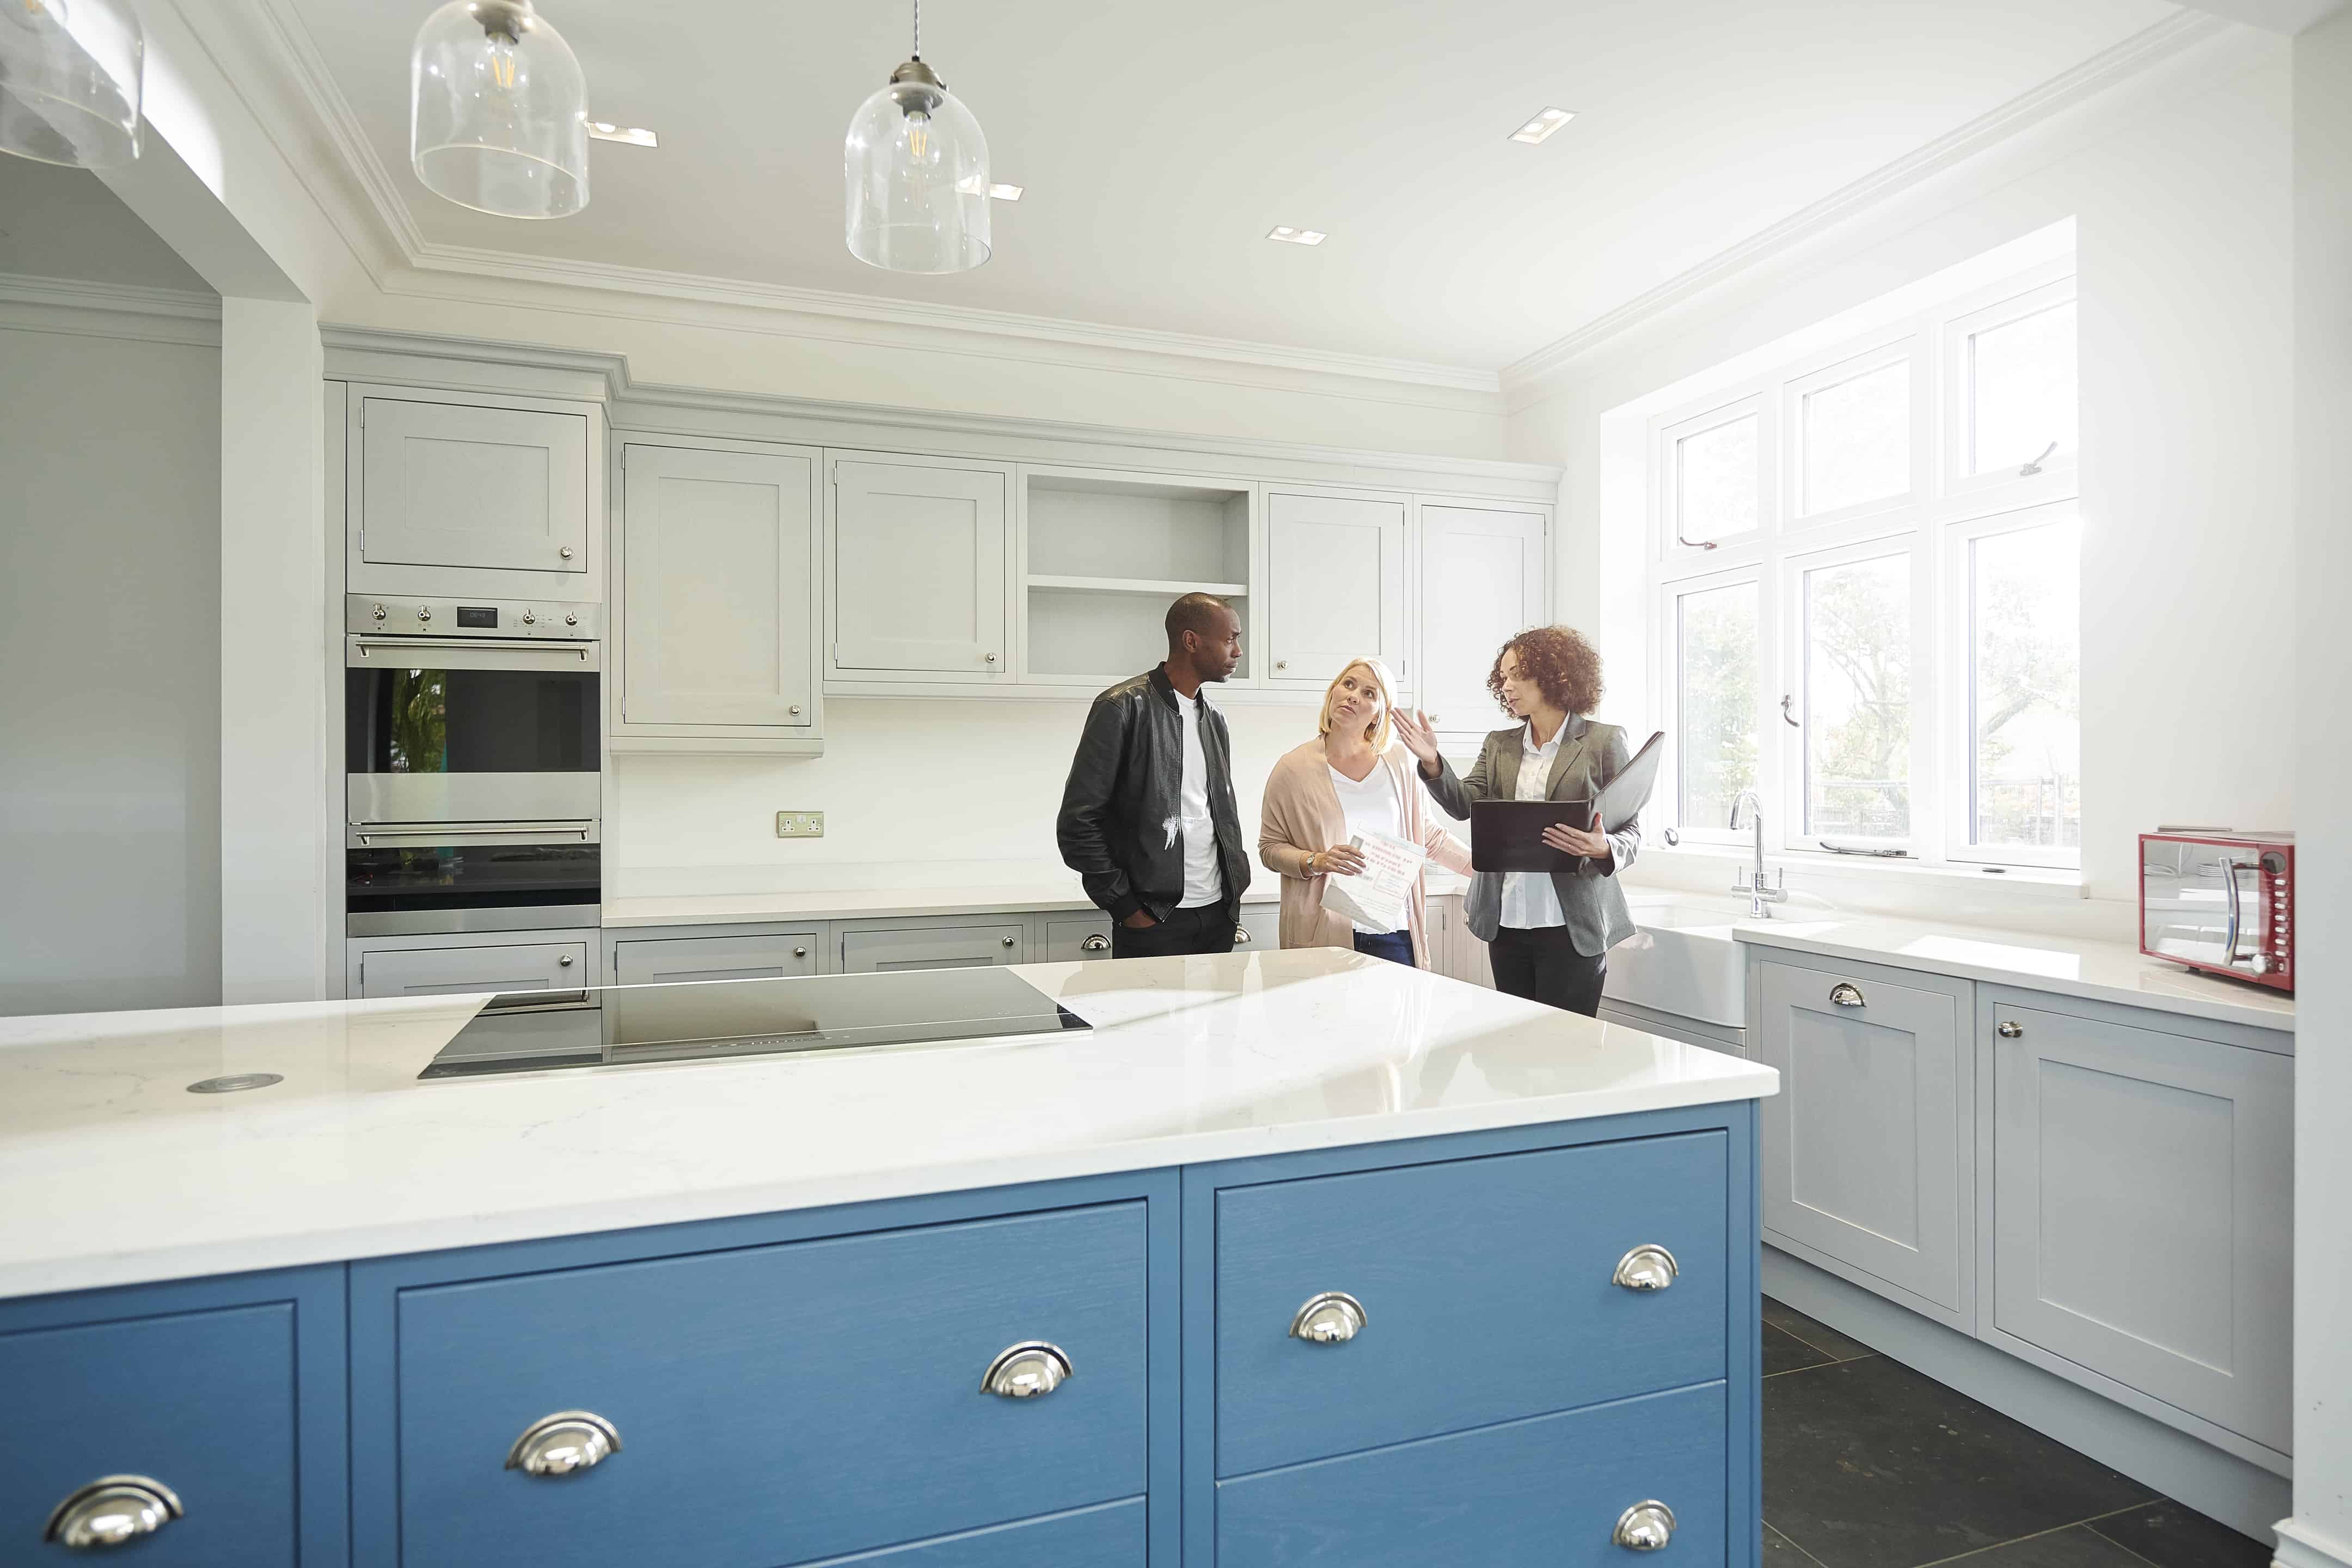 Real Estate Rewards - a saleswoman or estate agent shows a couple around a home with new kitchen - United Van Lines